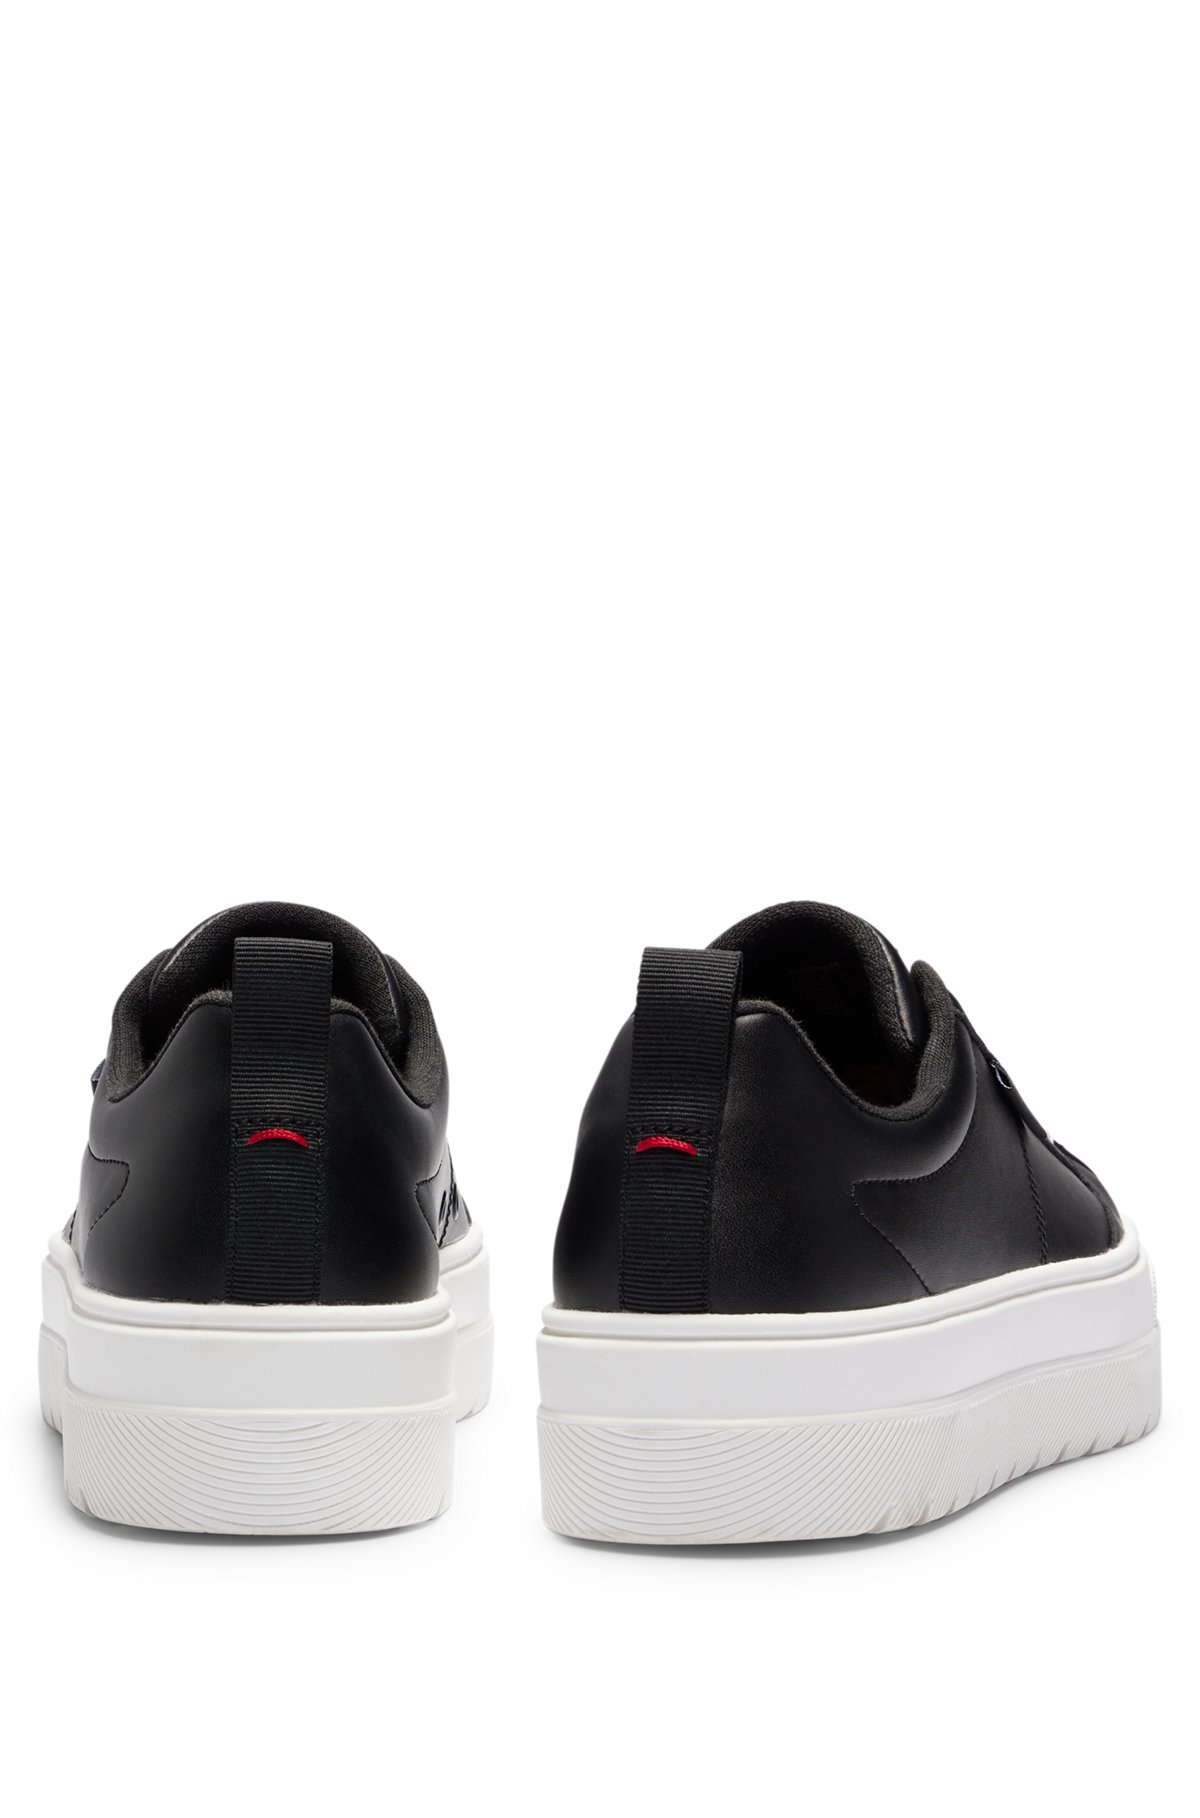 HUGO - Platform trainers with bonded leather